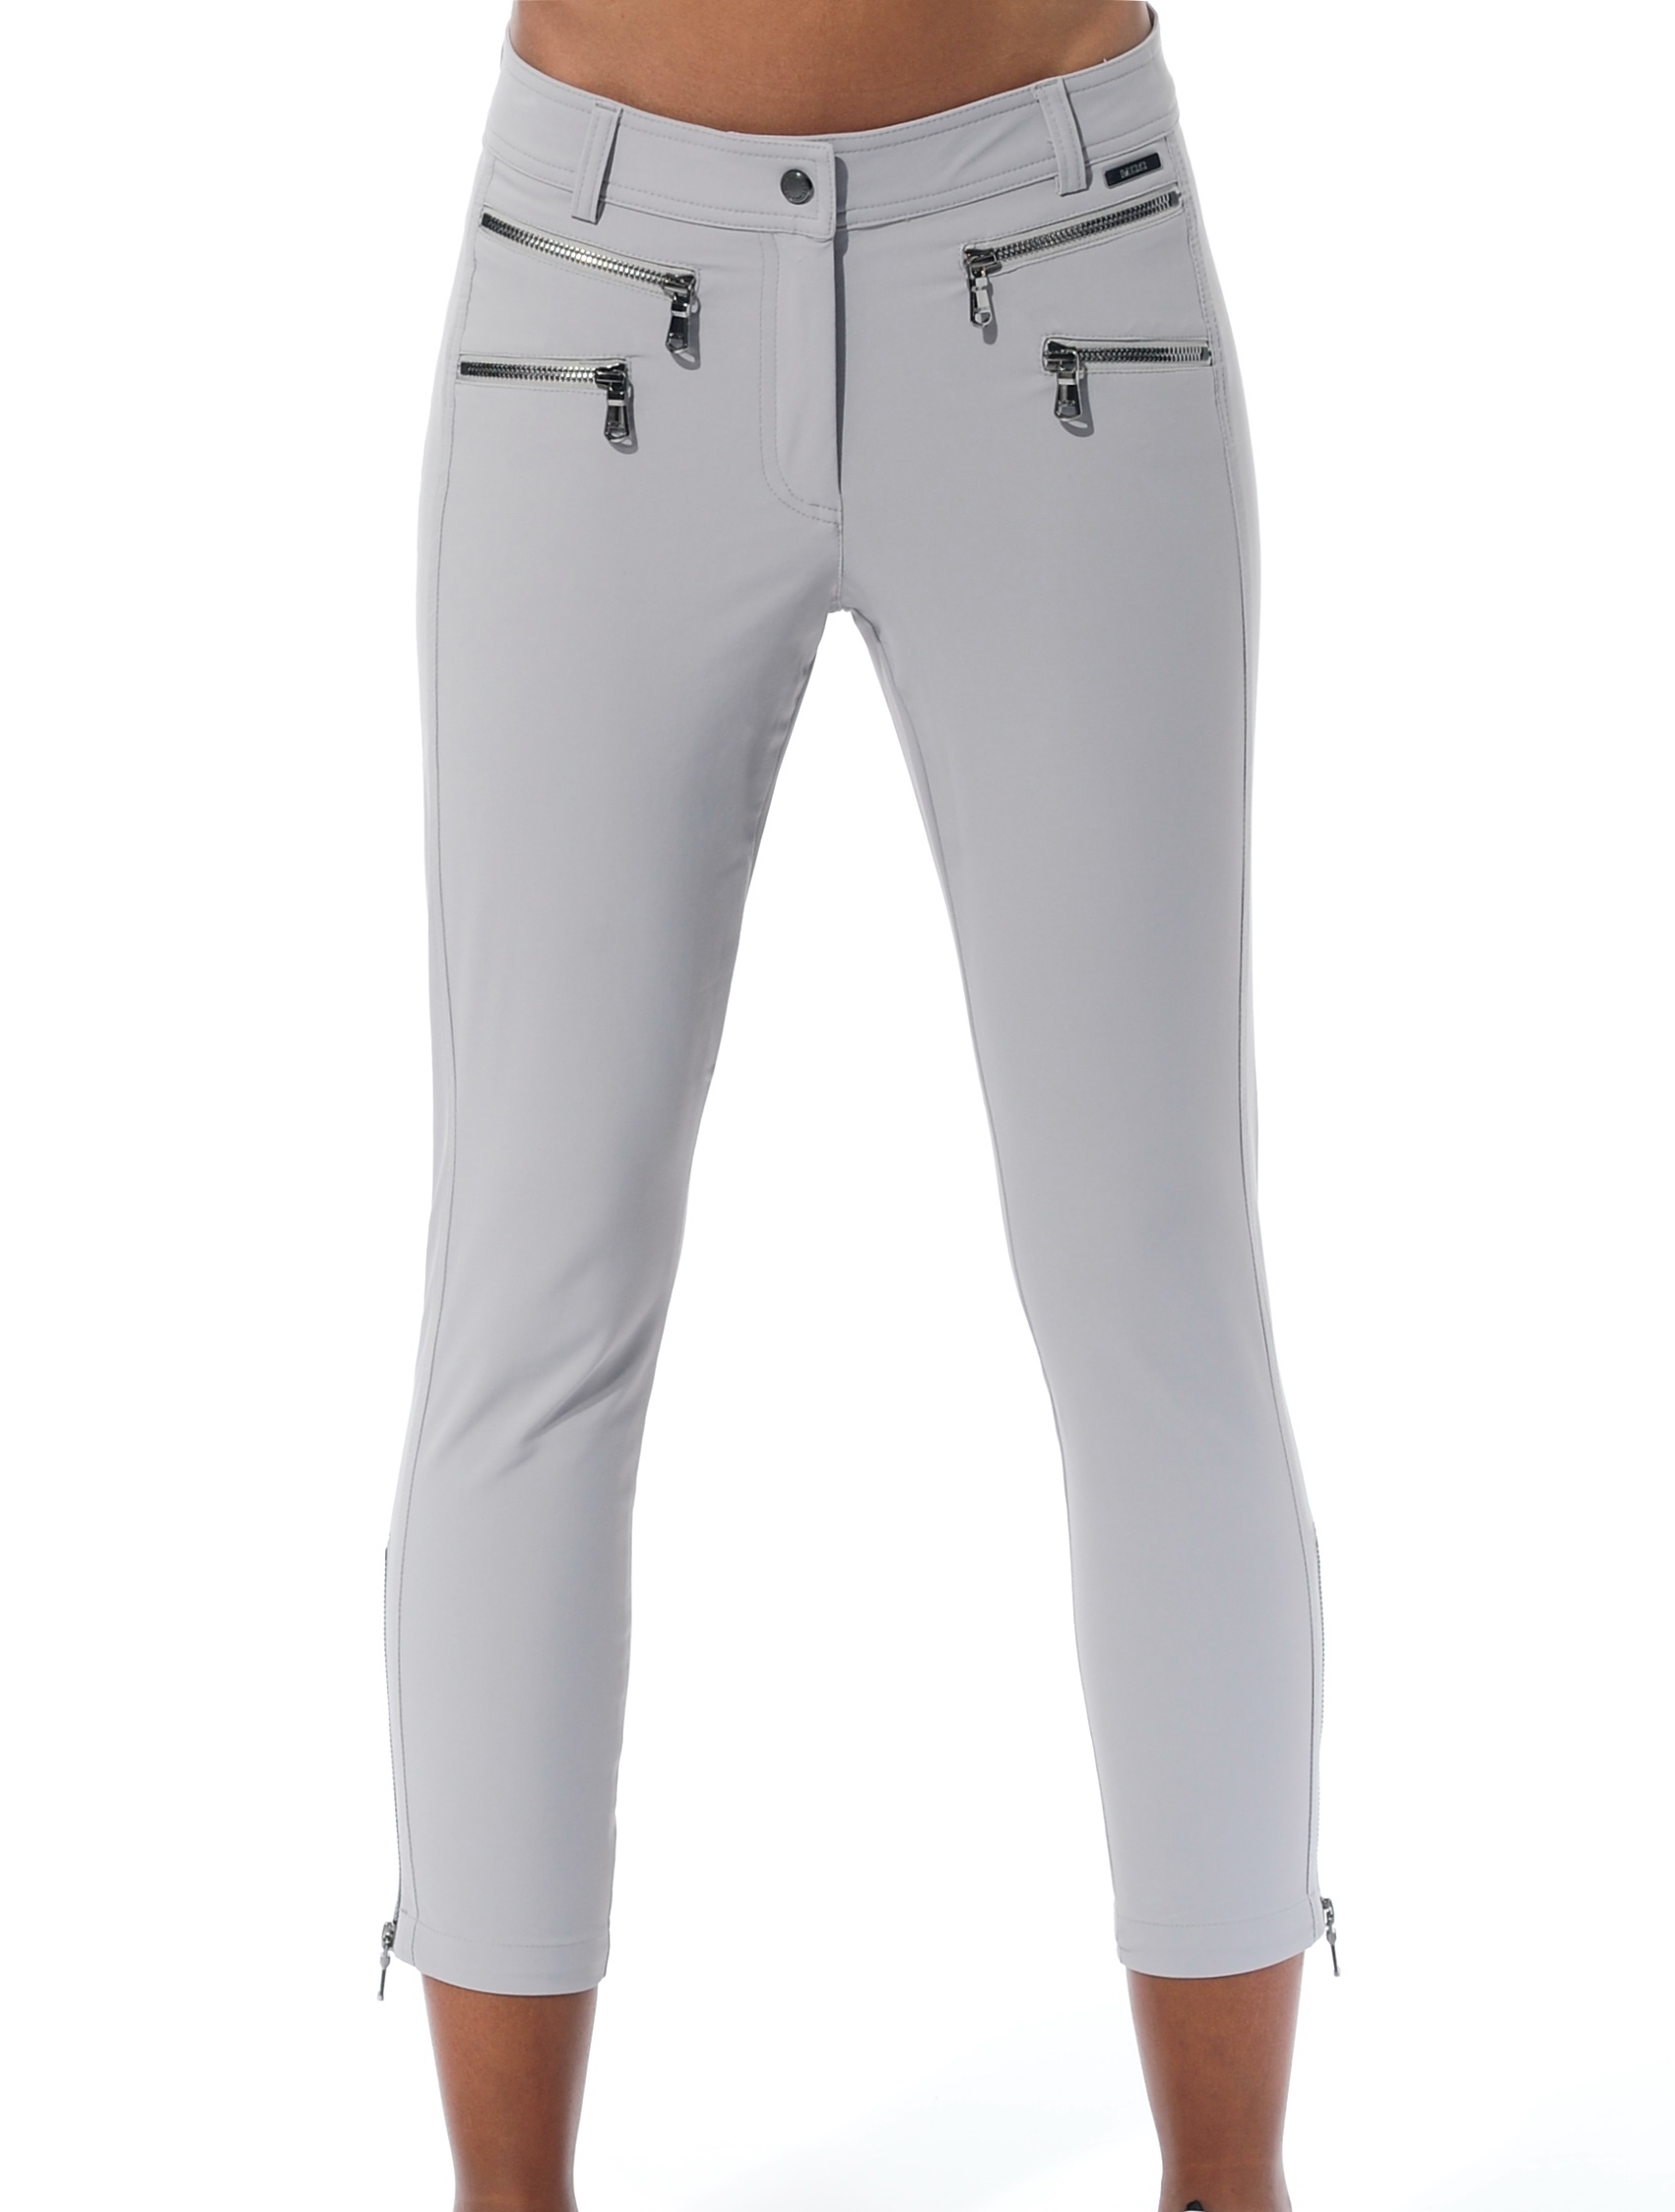 4way stretch double zip cropped pants grey 